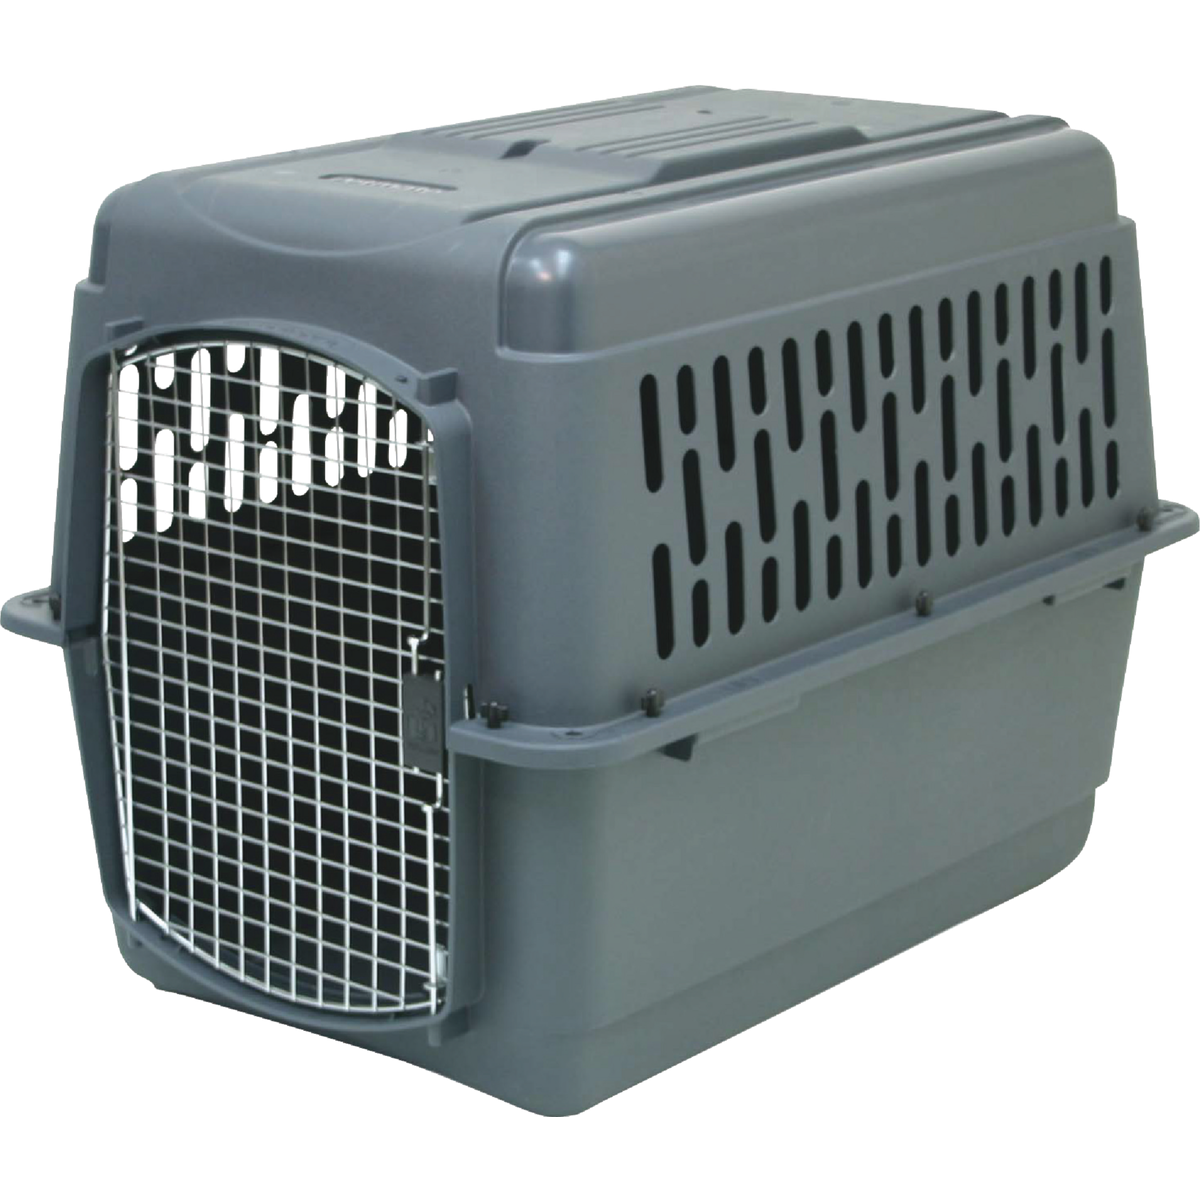 Pet Carriers & Kennels